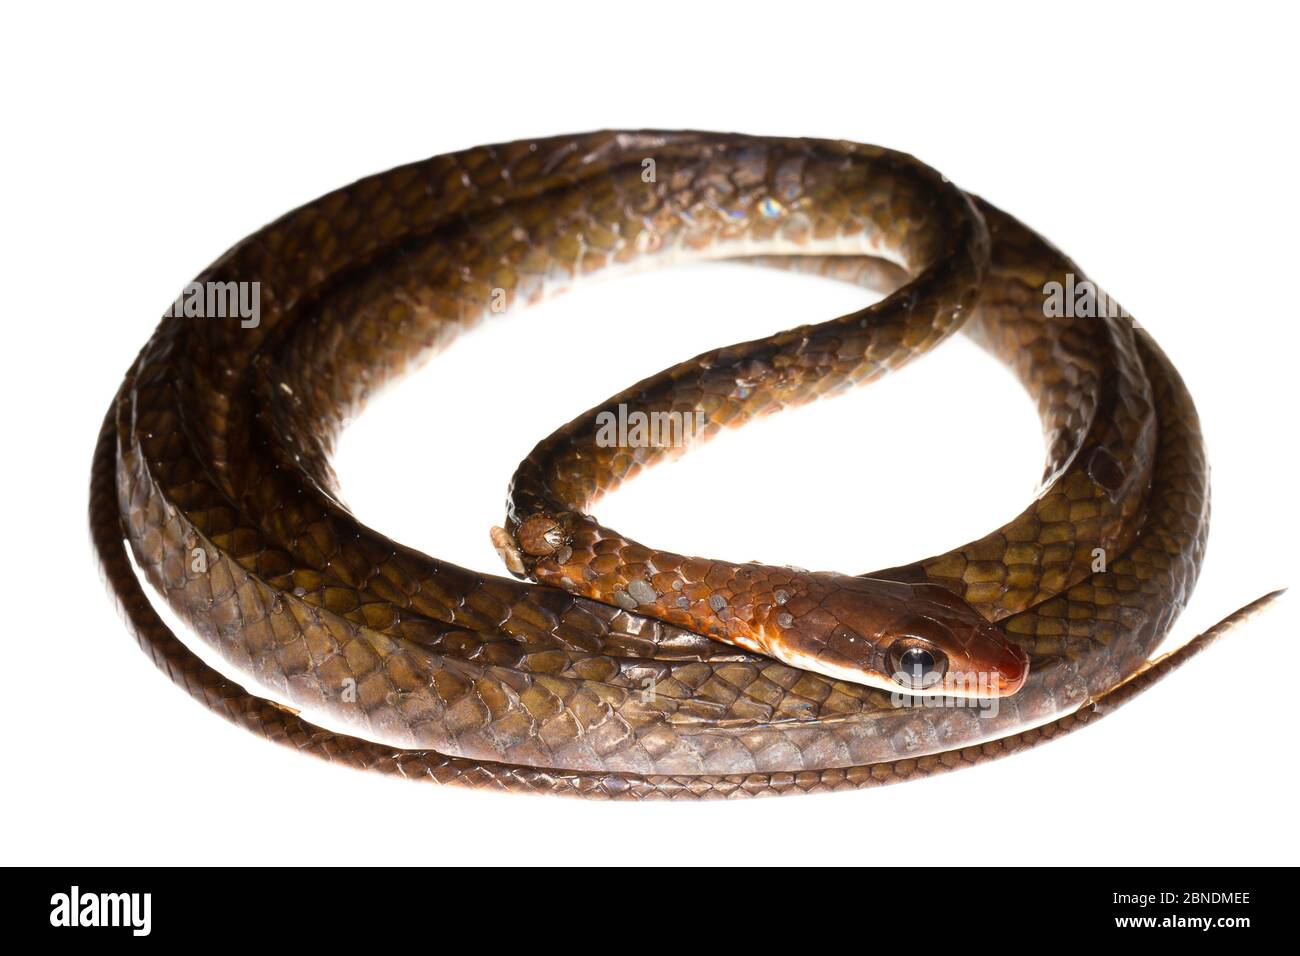 Olive Whipsnake (Chironius fuscus) coiled, Mahury, French Guiana  Meetyourneighbours.net project Stock Photo